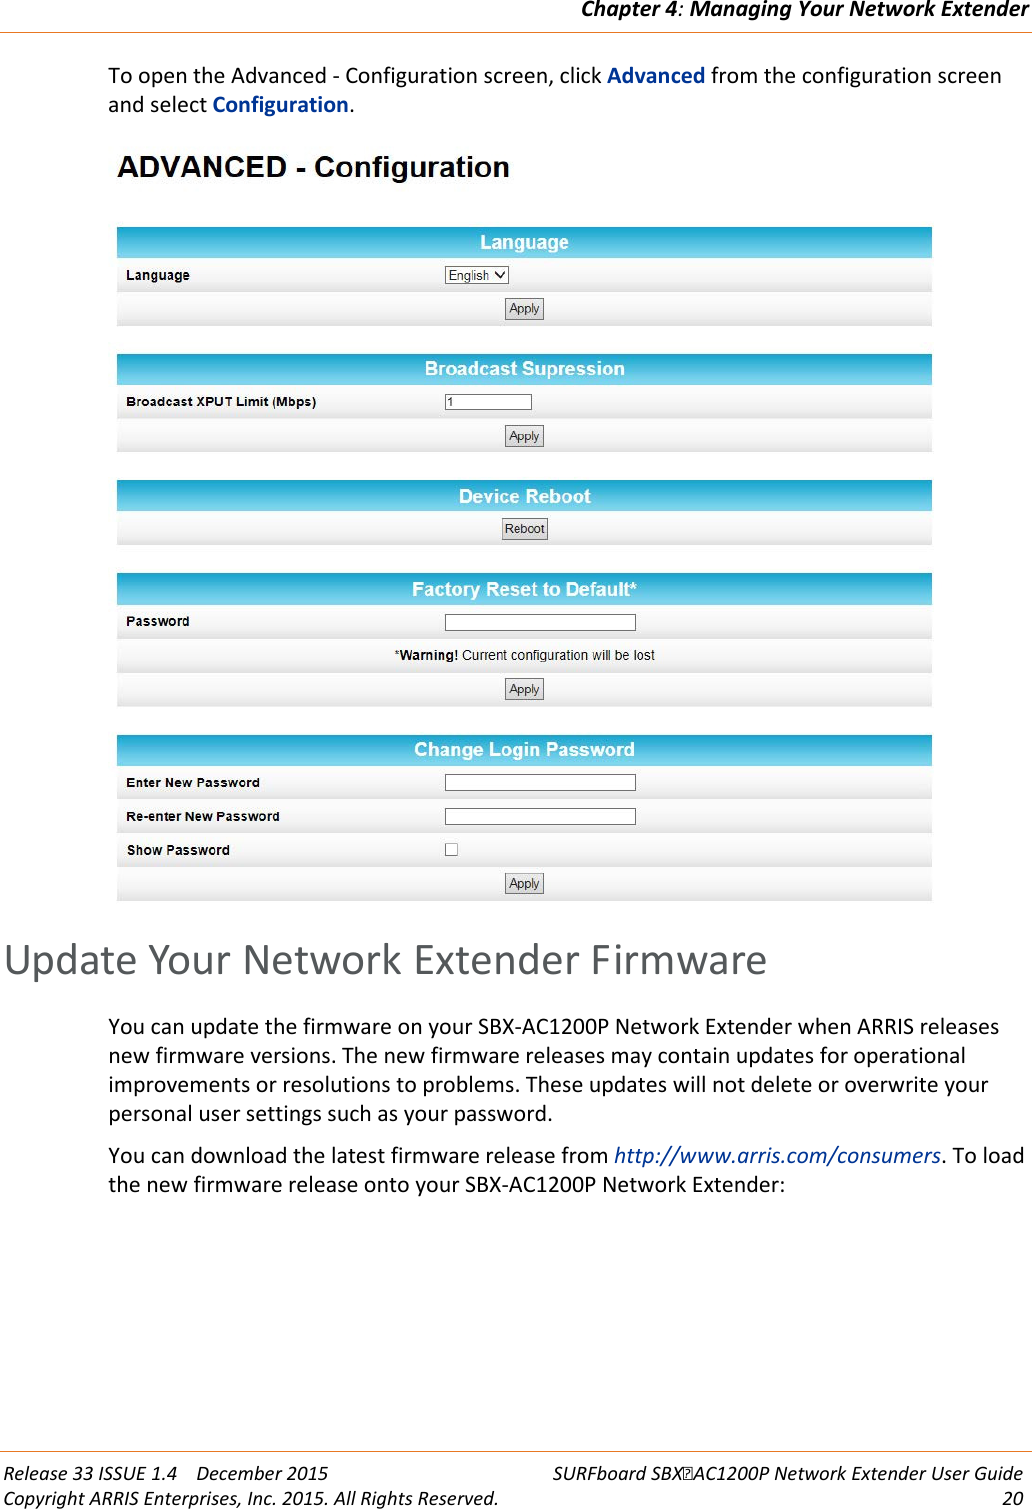 Chapter 4: Managing Your Network Extender  Release 33 ISSUE 1.4    December 2015 SURFboard SBXAC1200P Network Extender User Guide Copyright ARRIS Enterprises, Inc. 2015. All Rights Reserved. 20  To open the Advanced - Configuration screen, click Advanced from the configuration screen and select Configuration.    Update Your Network Extender Firmware You can update the firmware on your SBX-AC1200P Network Extender when ARRIS releases new firmware versions. The new firmware releases may contain updates for operational improvements or resolutions to problems. These updates will not delete or overwrite your personal user settings such as your password. You can download the latest firmware release from http://www.arris.com/consumers. To load the new firmware release onto your SBX-AC1200P Network Extender: 